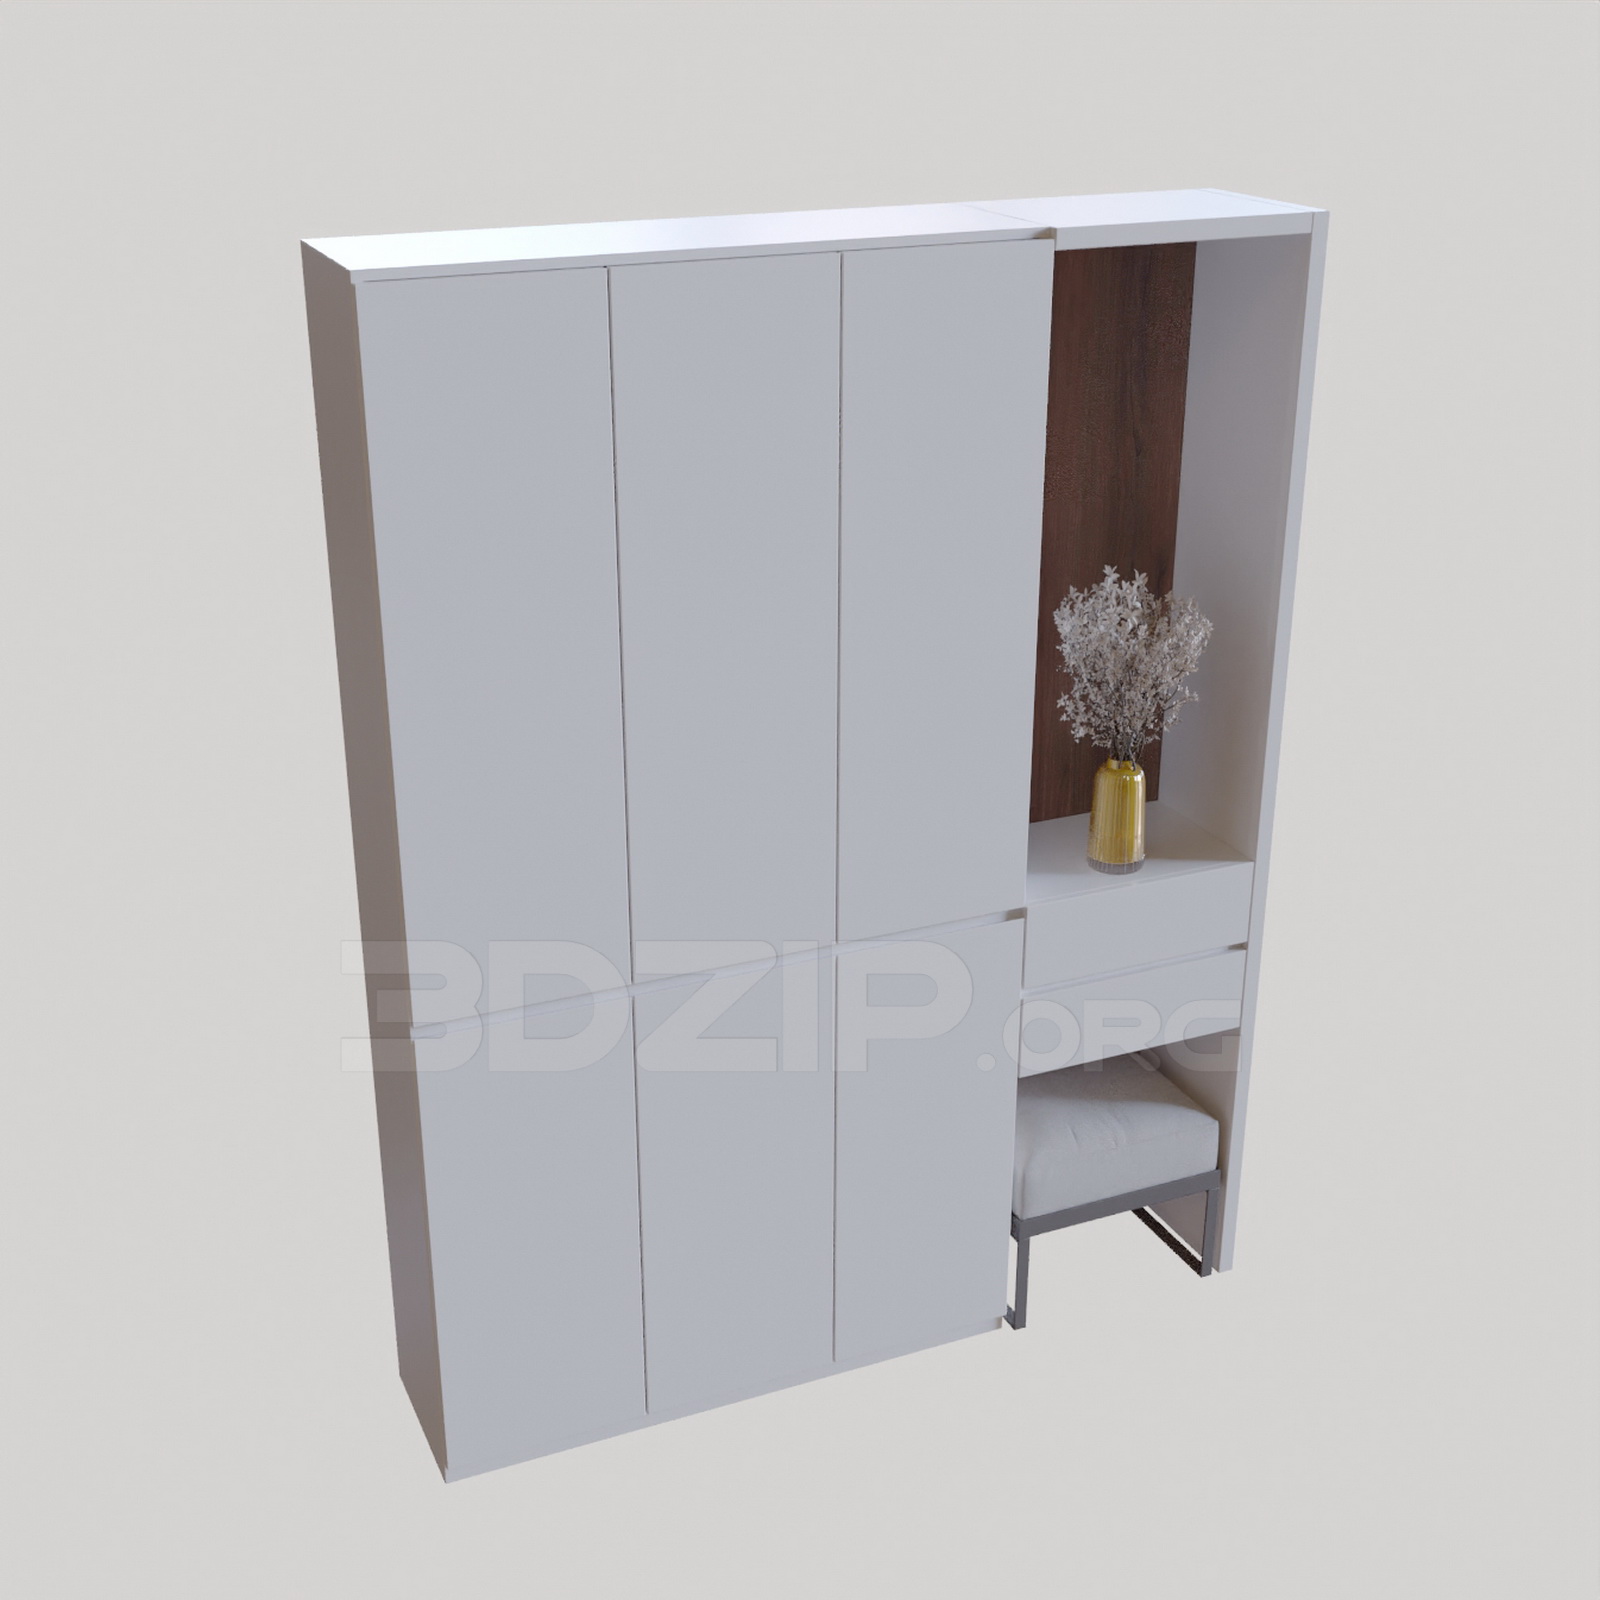 12110. Download Free Shoe Cabinet Model By Hoang Tung